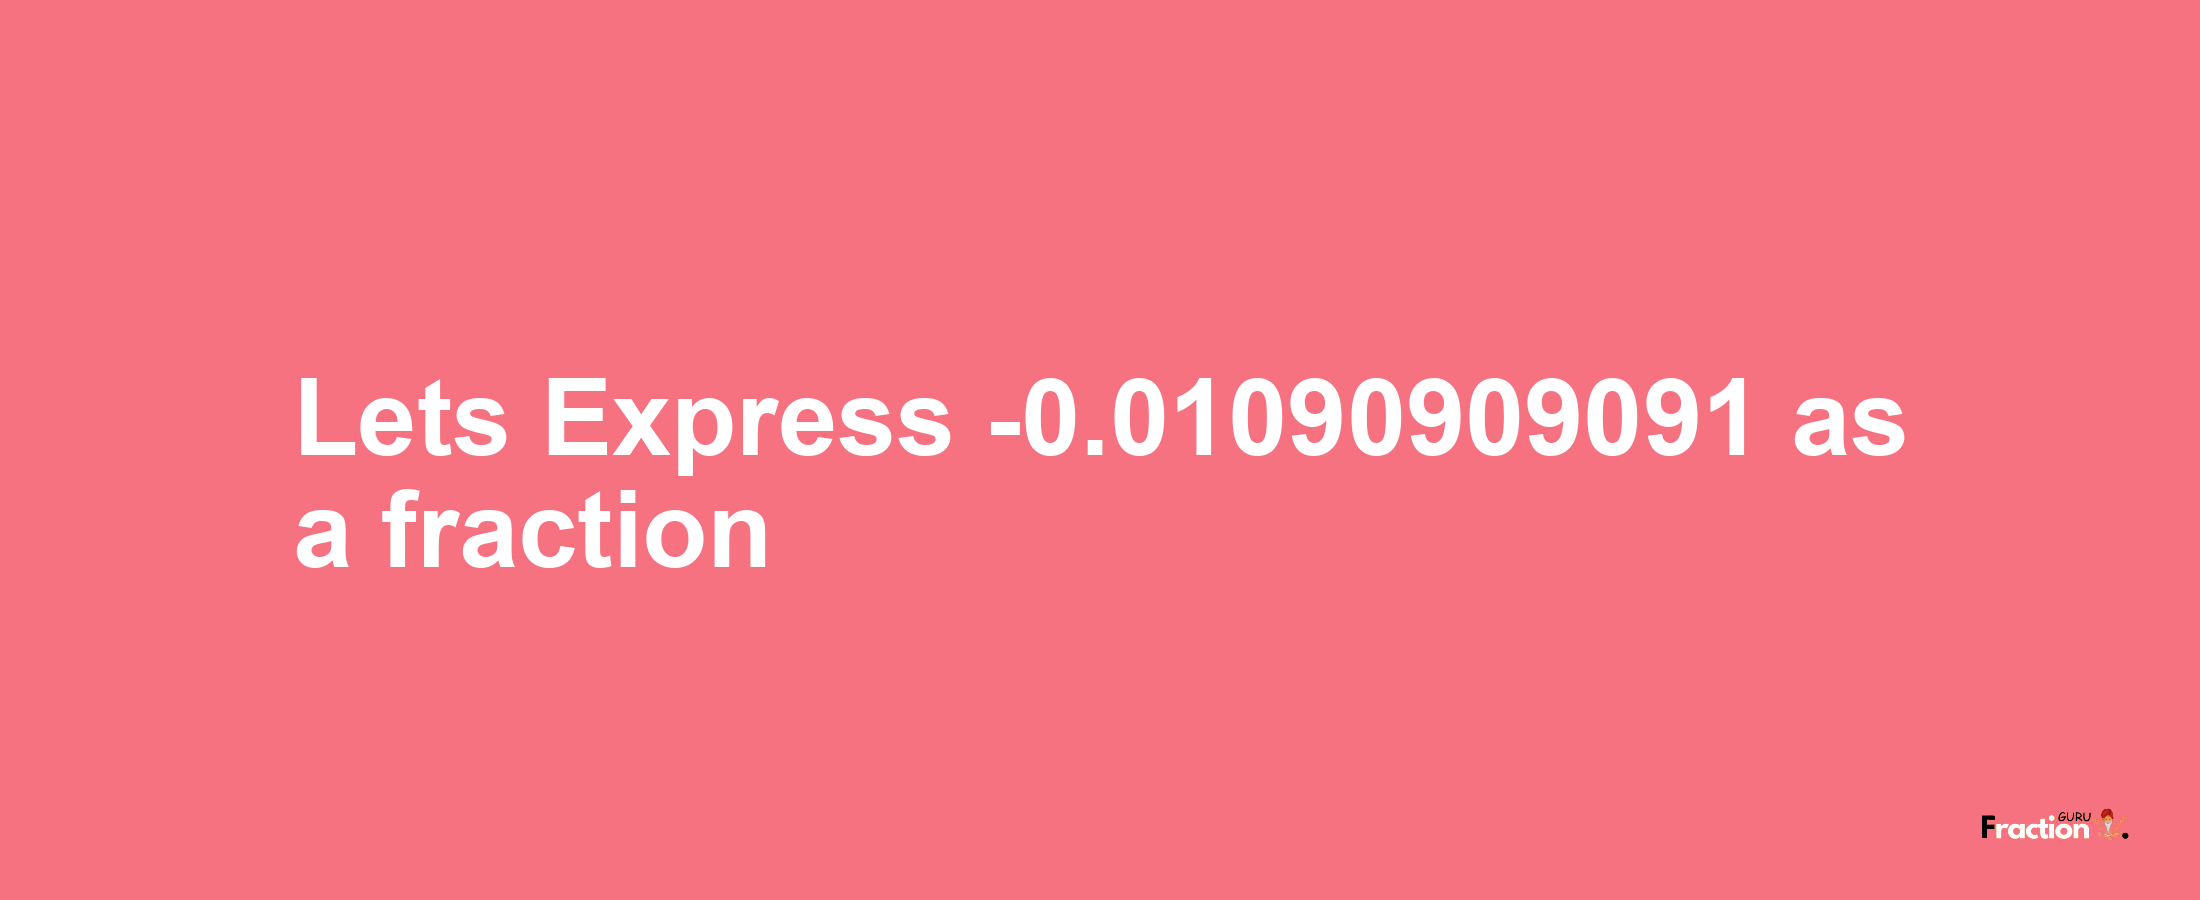 Lets Express -0.01090909091 as afraction